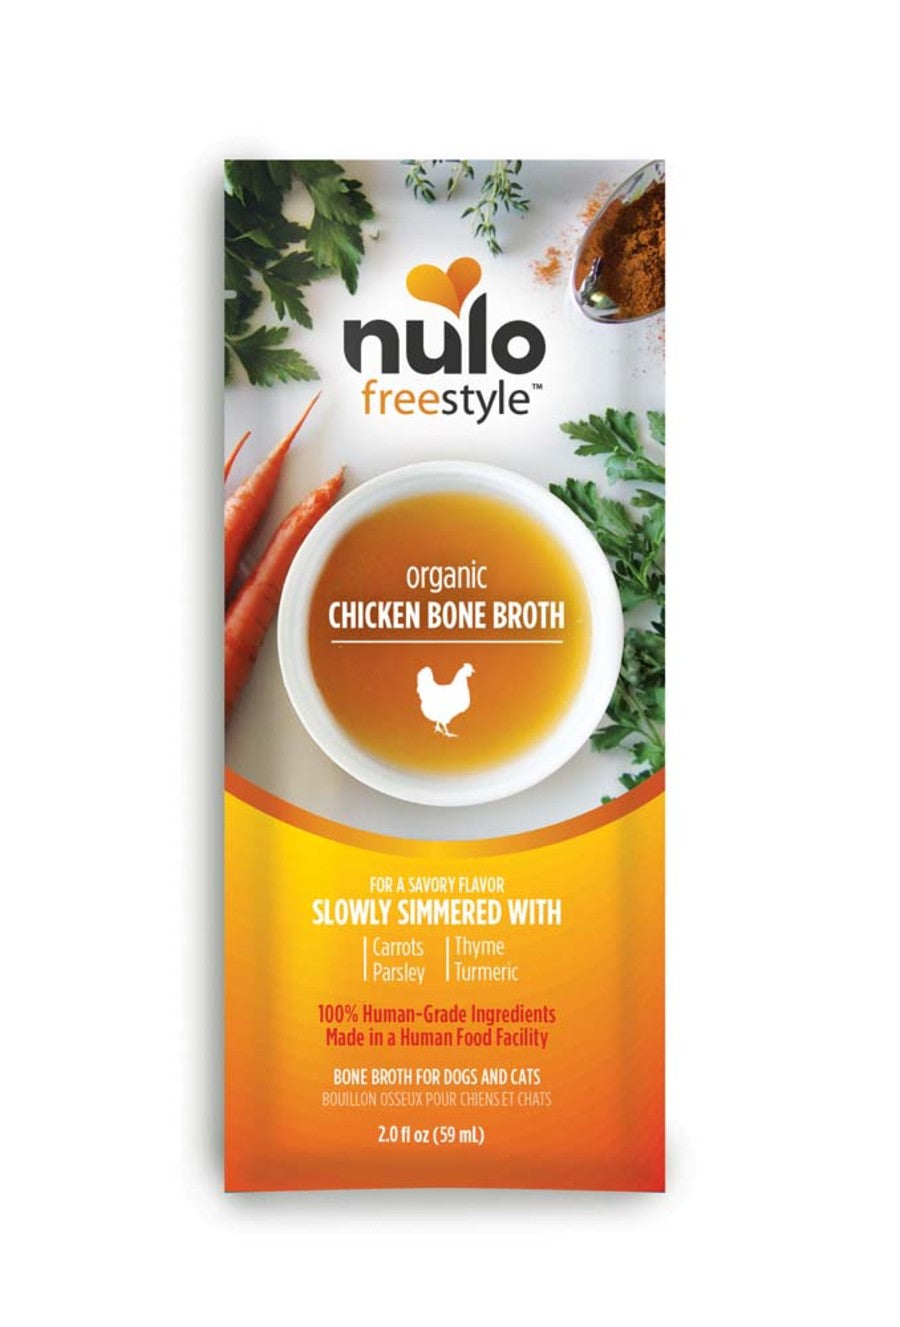 Nulo FreeStyle Grain-Free Home-Style Chicken Bone Broth Dog & Cat Topper